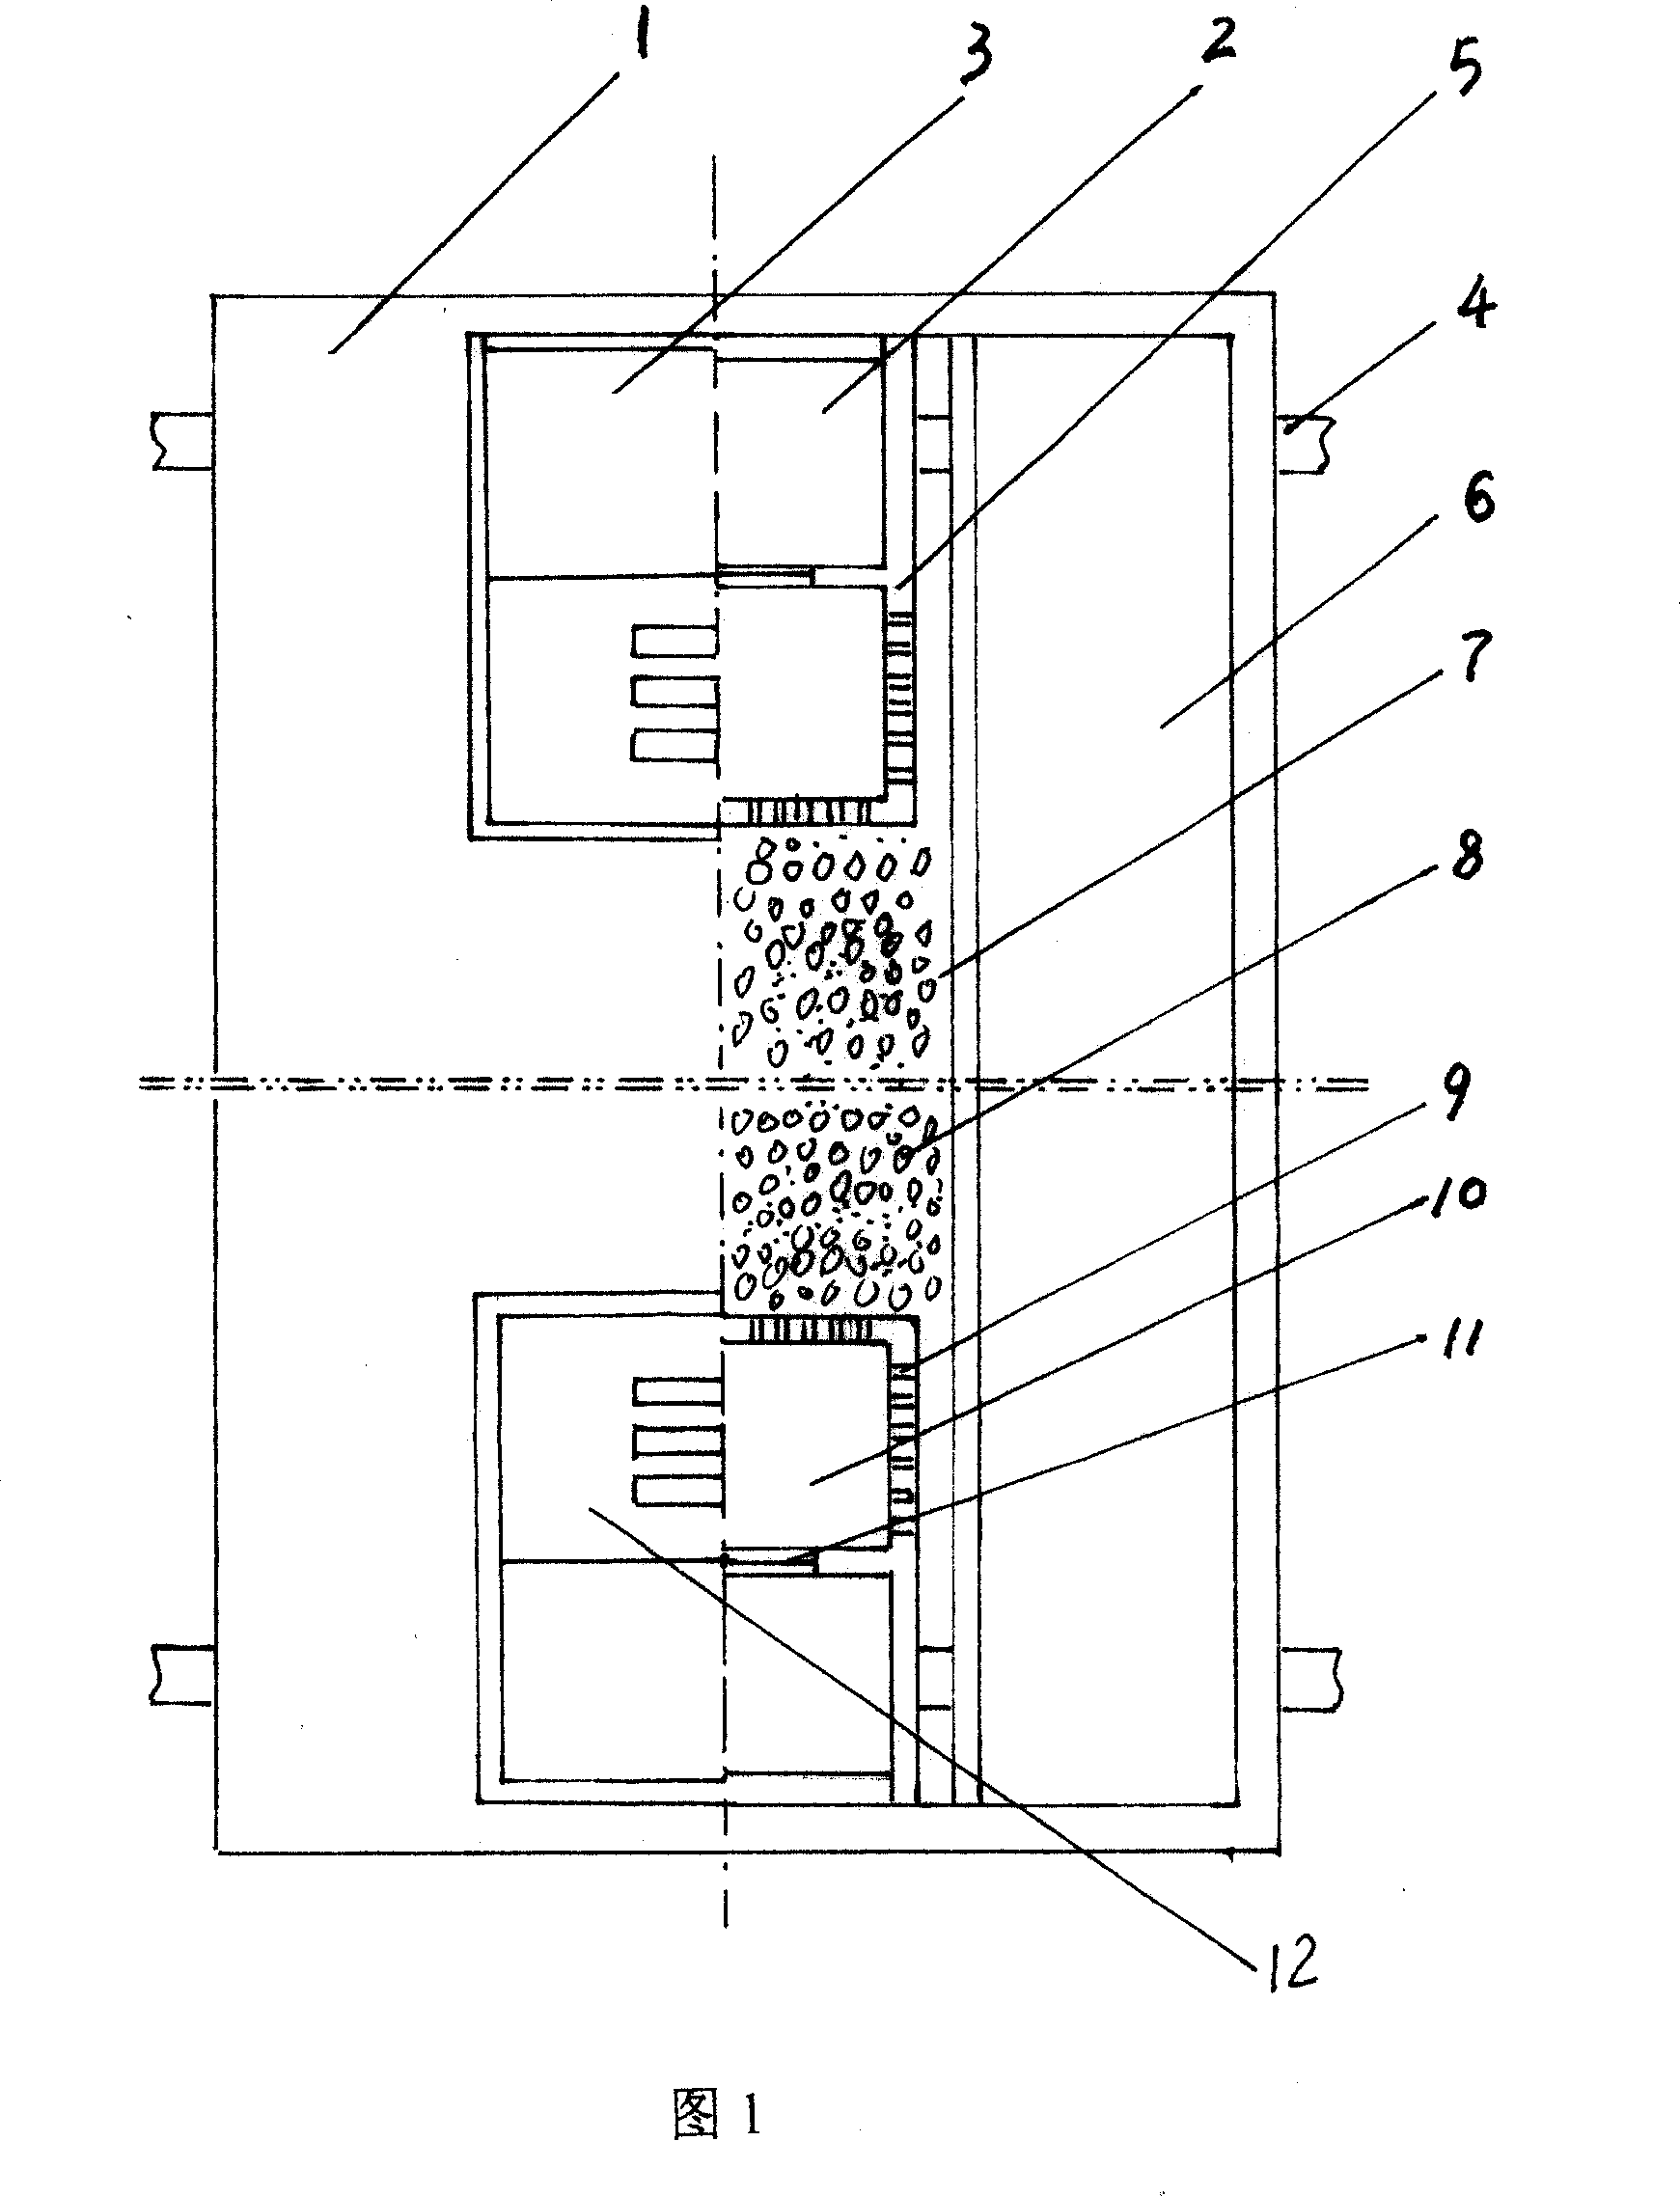 Method for fastly collecting rain and leaking on ground